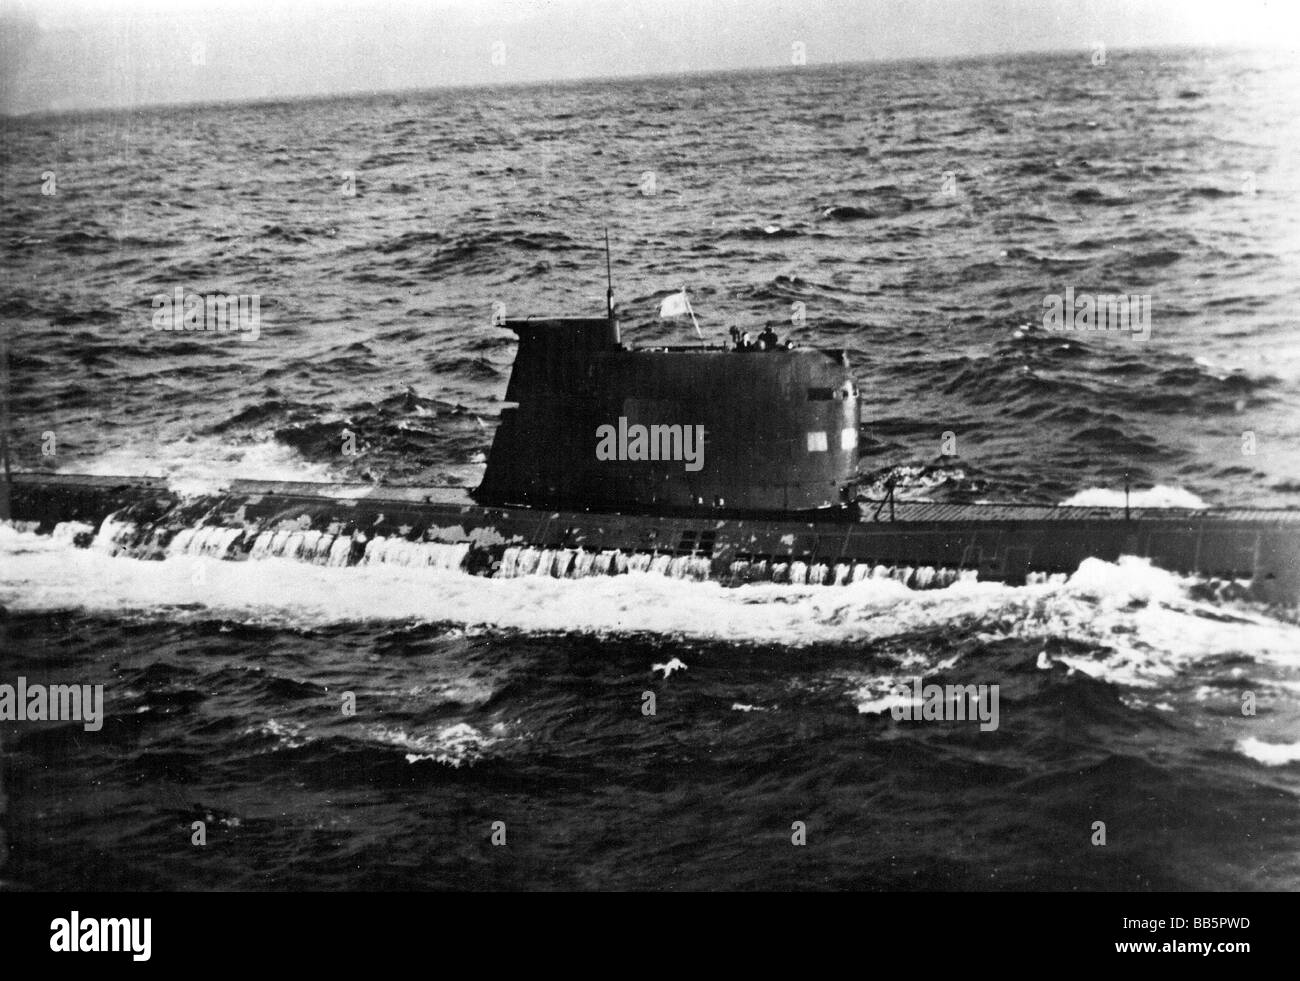 geography / travel, Russia, military, soviet submarine 'Flying Red Star' on the way to Cuba, 'Cuba Missile Crisis' 22. - 27.10.1962, Stock Photo